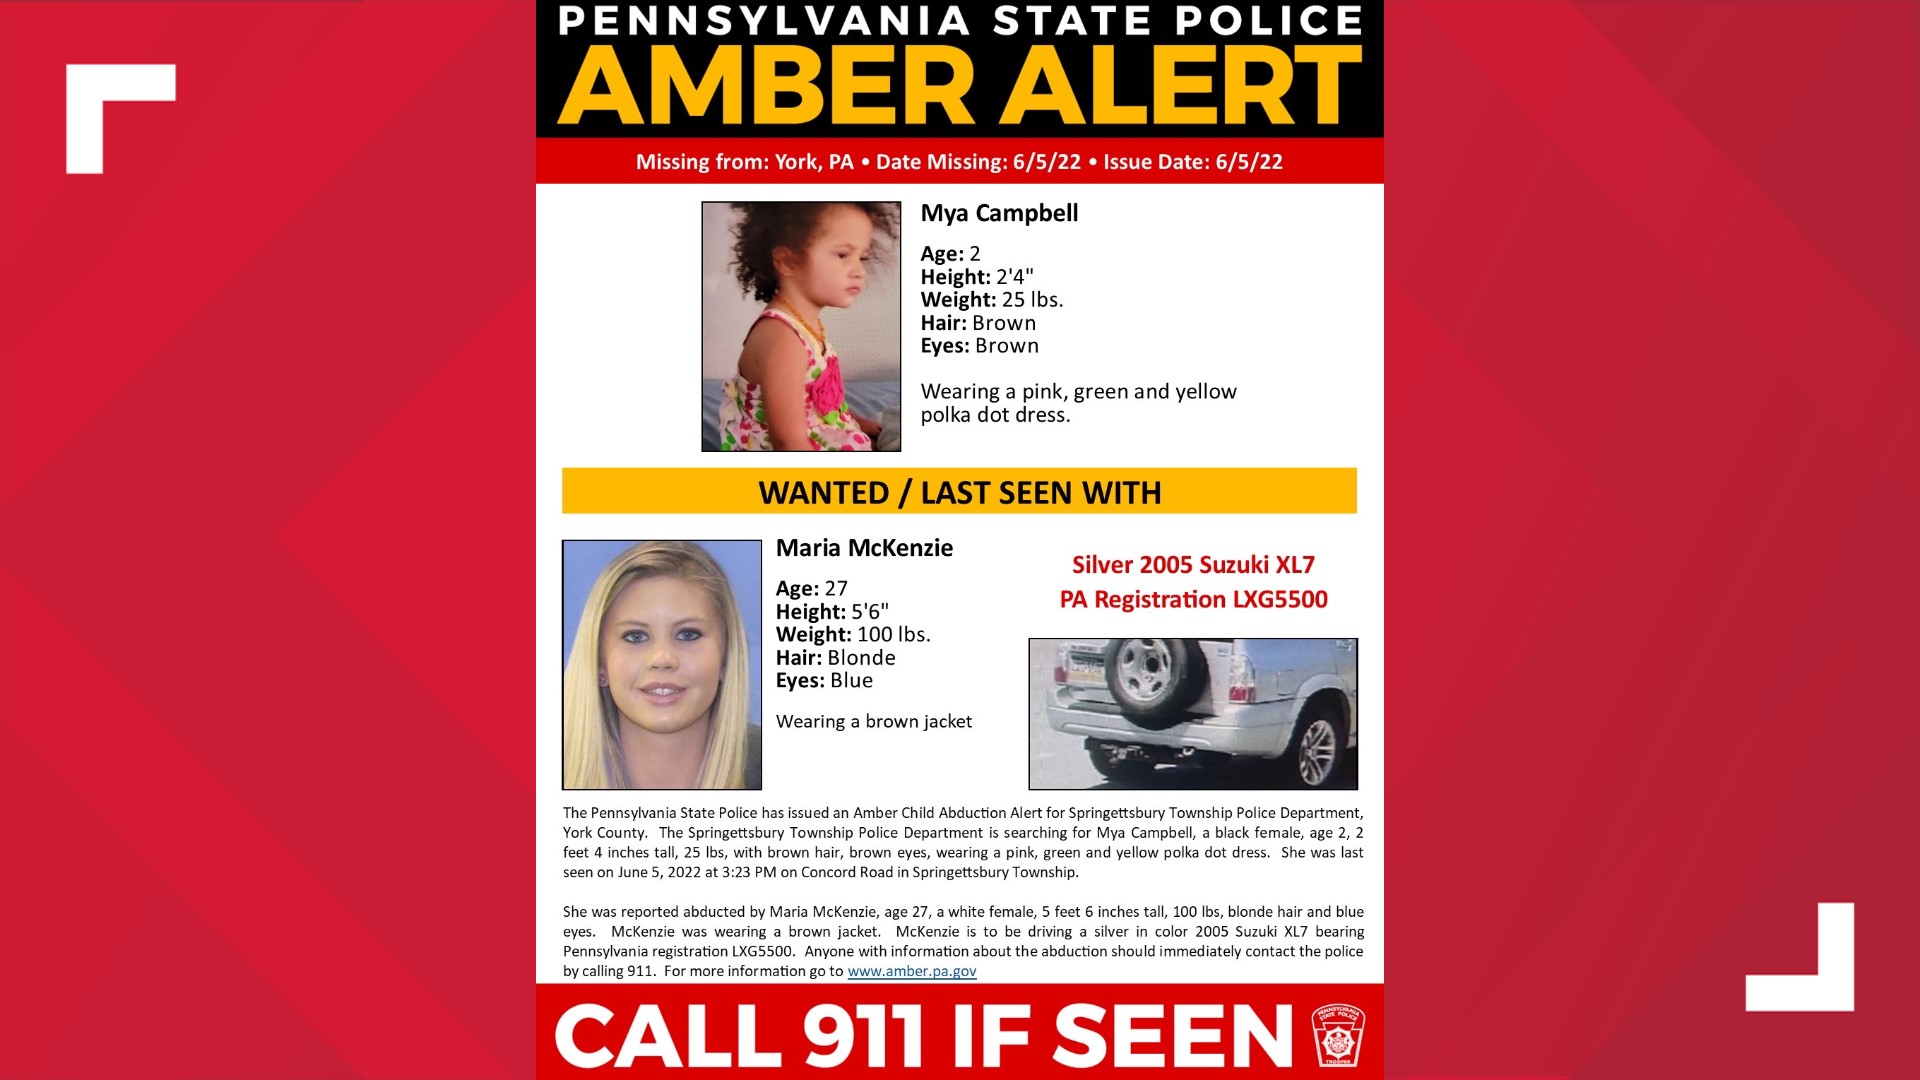 State Police say that the Amber Alert has been cancelled after two-year-old Mya Campbell has been located safely.